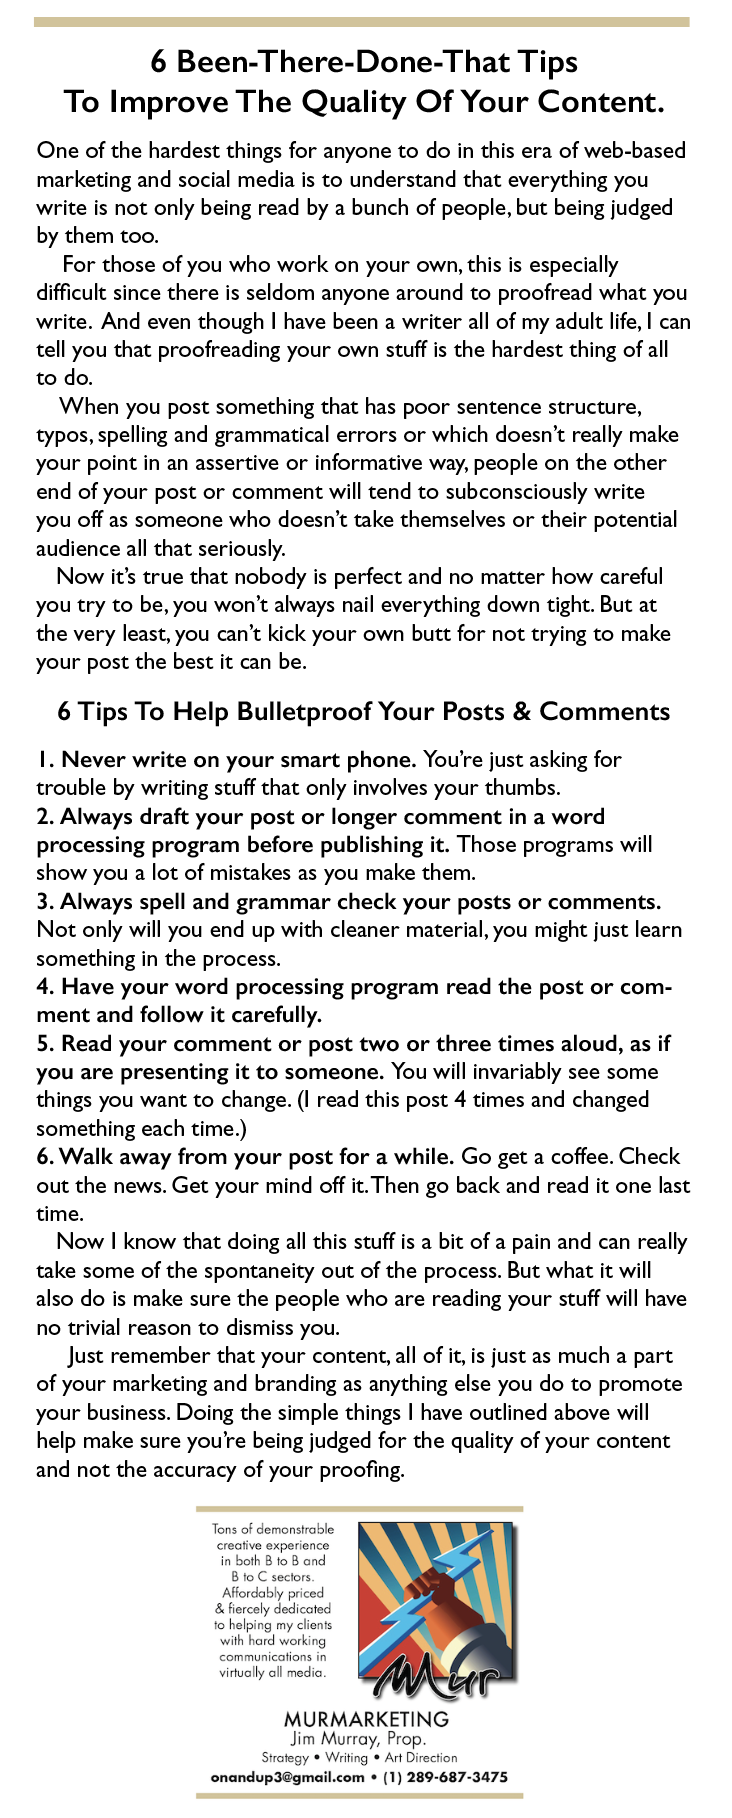 6 Been-There-Done-That Tips
To Improve The Quality Of Your Content.

One of the hardest things for anyone to do in this era of web-based
marketing and social media is to understand that everything you
write is not only being read by a bunch of people, but being judged
by them too.

For those of you who work on your own, this is especially
difficult since there is seldom anyone around to proofread what you
write. And even though | have been a writer all of my adult life, | can
tell you that proofreading your own stuff is the hardest thing of all
to do.

When you post something that has poor sentence structure,
typos, spelling and grammatical errors or which doesn't really make
your point in an assertive or informative way, people on the other
end of your post or comment will tend to subconsciously write
you off as someone who doesn't take themselves or their potential
audience all that seriously.

Now it’s true that nobody is perfect and no matter how careful
you try to be, you won't always nail everything down tight. But at
the very least, you can't kick your own butt for not trying to make
your post the best it can be.

6 Tips To Help Bulletproof Your Posts & Comments

|. Never write on your smart phone. You're just asking for
trouble by writing stuff that only involves your thumbs.

2. Always draft your post or longer comment in a word
processing program before publishing it. Those programs will
show you a lot of mistakes as you make them.

3. Always spell and grammar check your posts or comments.
Not only will you end up with cleaner material, you might just learn
something in the process.

4. Have your word processing program read the post or com-
ment and follow it carefully.

5. Read your comment or post two or three times aloud, as if
you are presenting it to someone. You will invariably see some
things you want to change. (I read this post 4 times and changed
something each time.)

6. Walk away from your post for a while. Go get a coffee. Check
out the news. Get your mind off it. Then go back and read it one last
time.

Now | know that doing all this stuff is a bit of a pain and can really
take some of the spontaneity out of the process. But what it will
also do is make sure the people who are reading your stuff will have
no trivial reason to dismiss you.

Just remember that your content, all of it, is just as much a part
of your marketing and branding as anything else you do to promote
your business. Doing the simple things | have outlined above will
help make sure you're being judged for the quality of your content
and not the accuracy of your proofing.

.